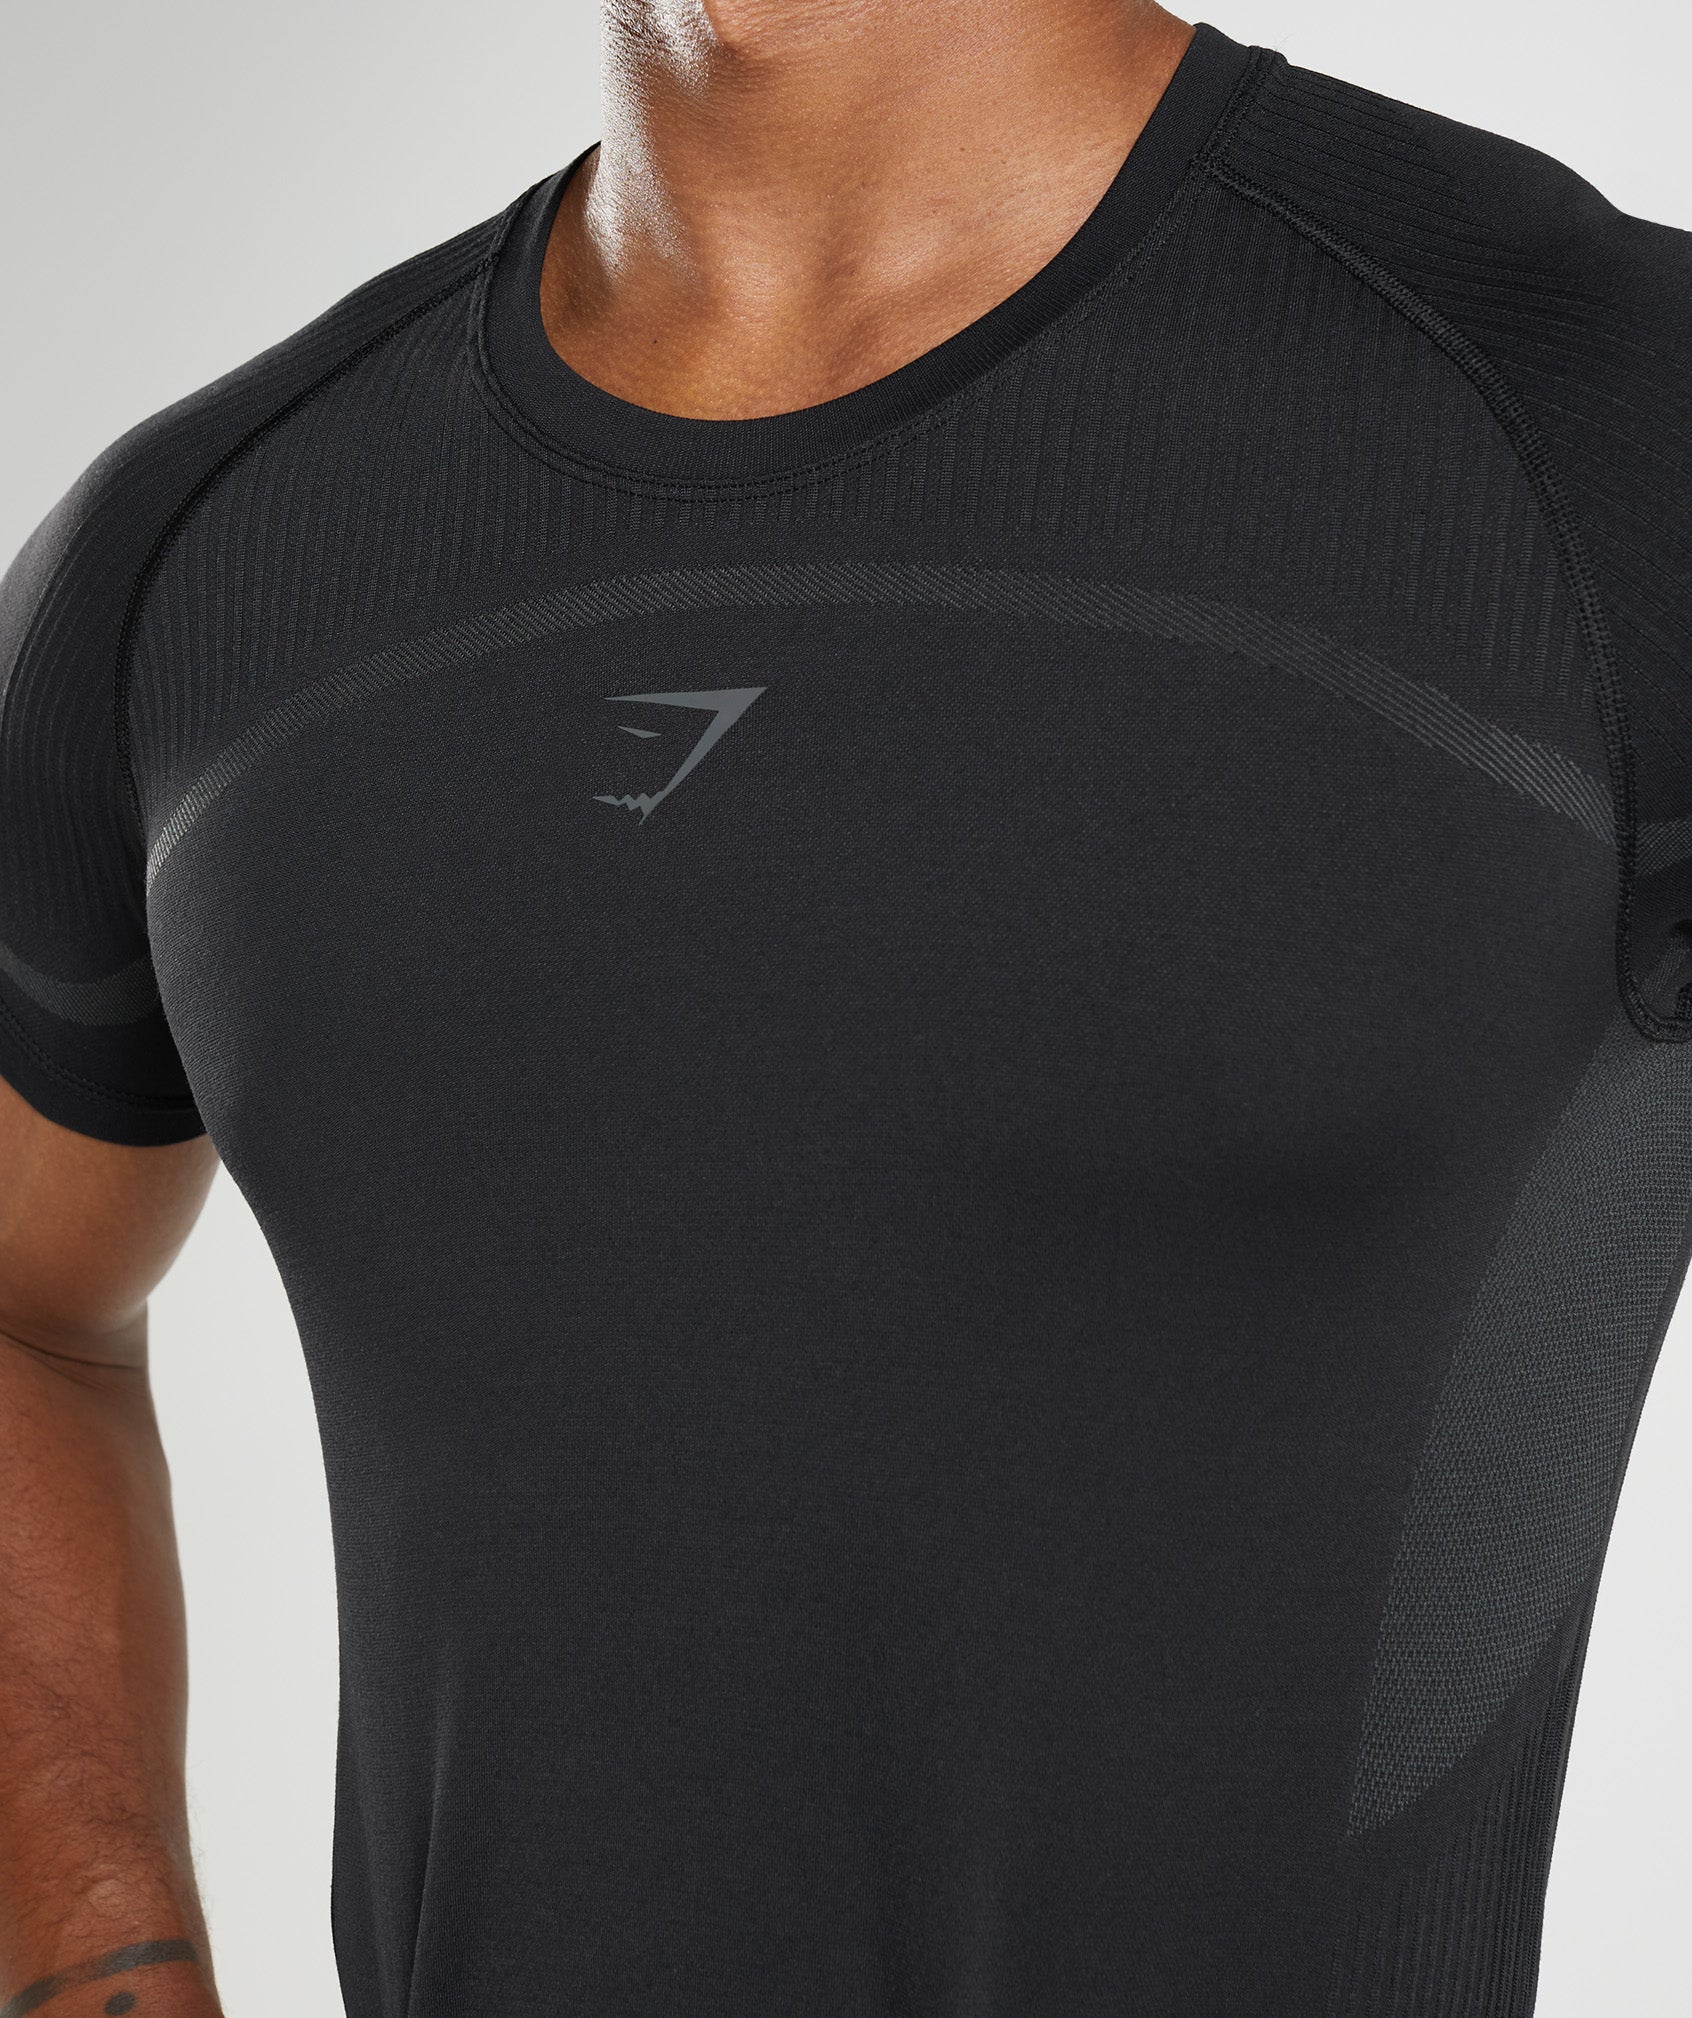 315 Seamless T-Shirt in Black - view 7